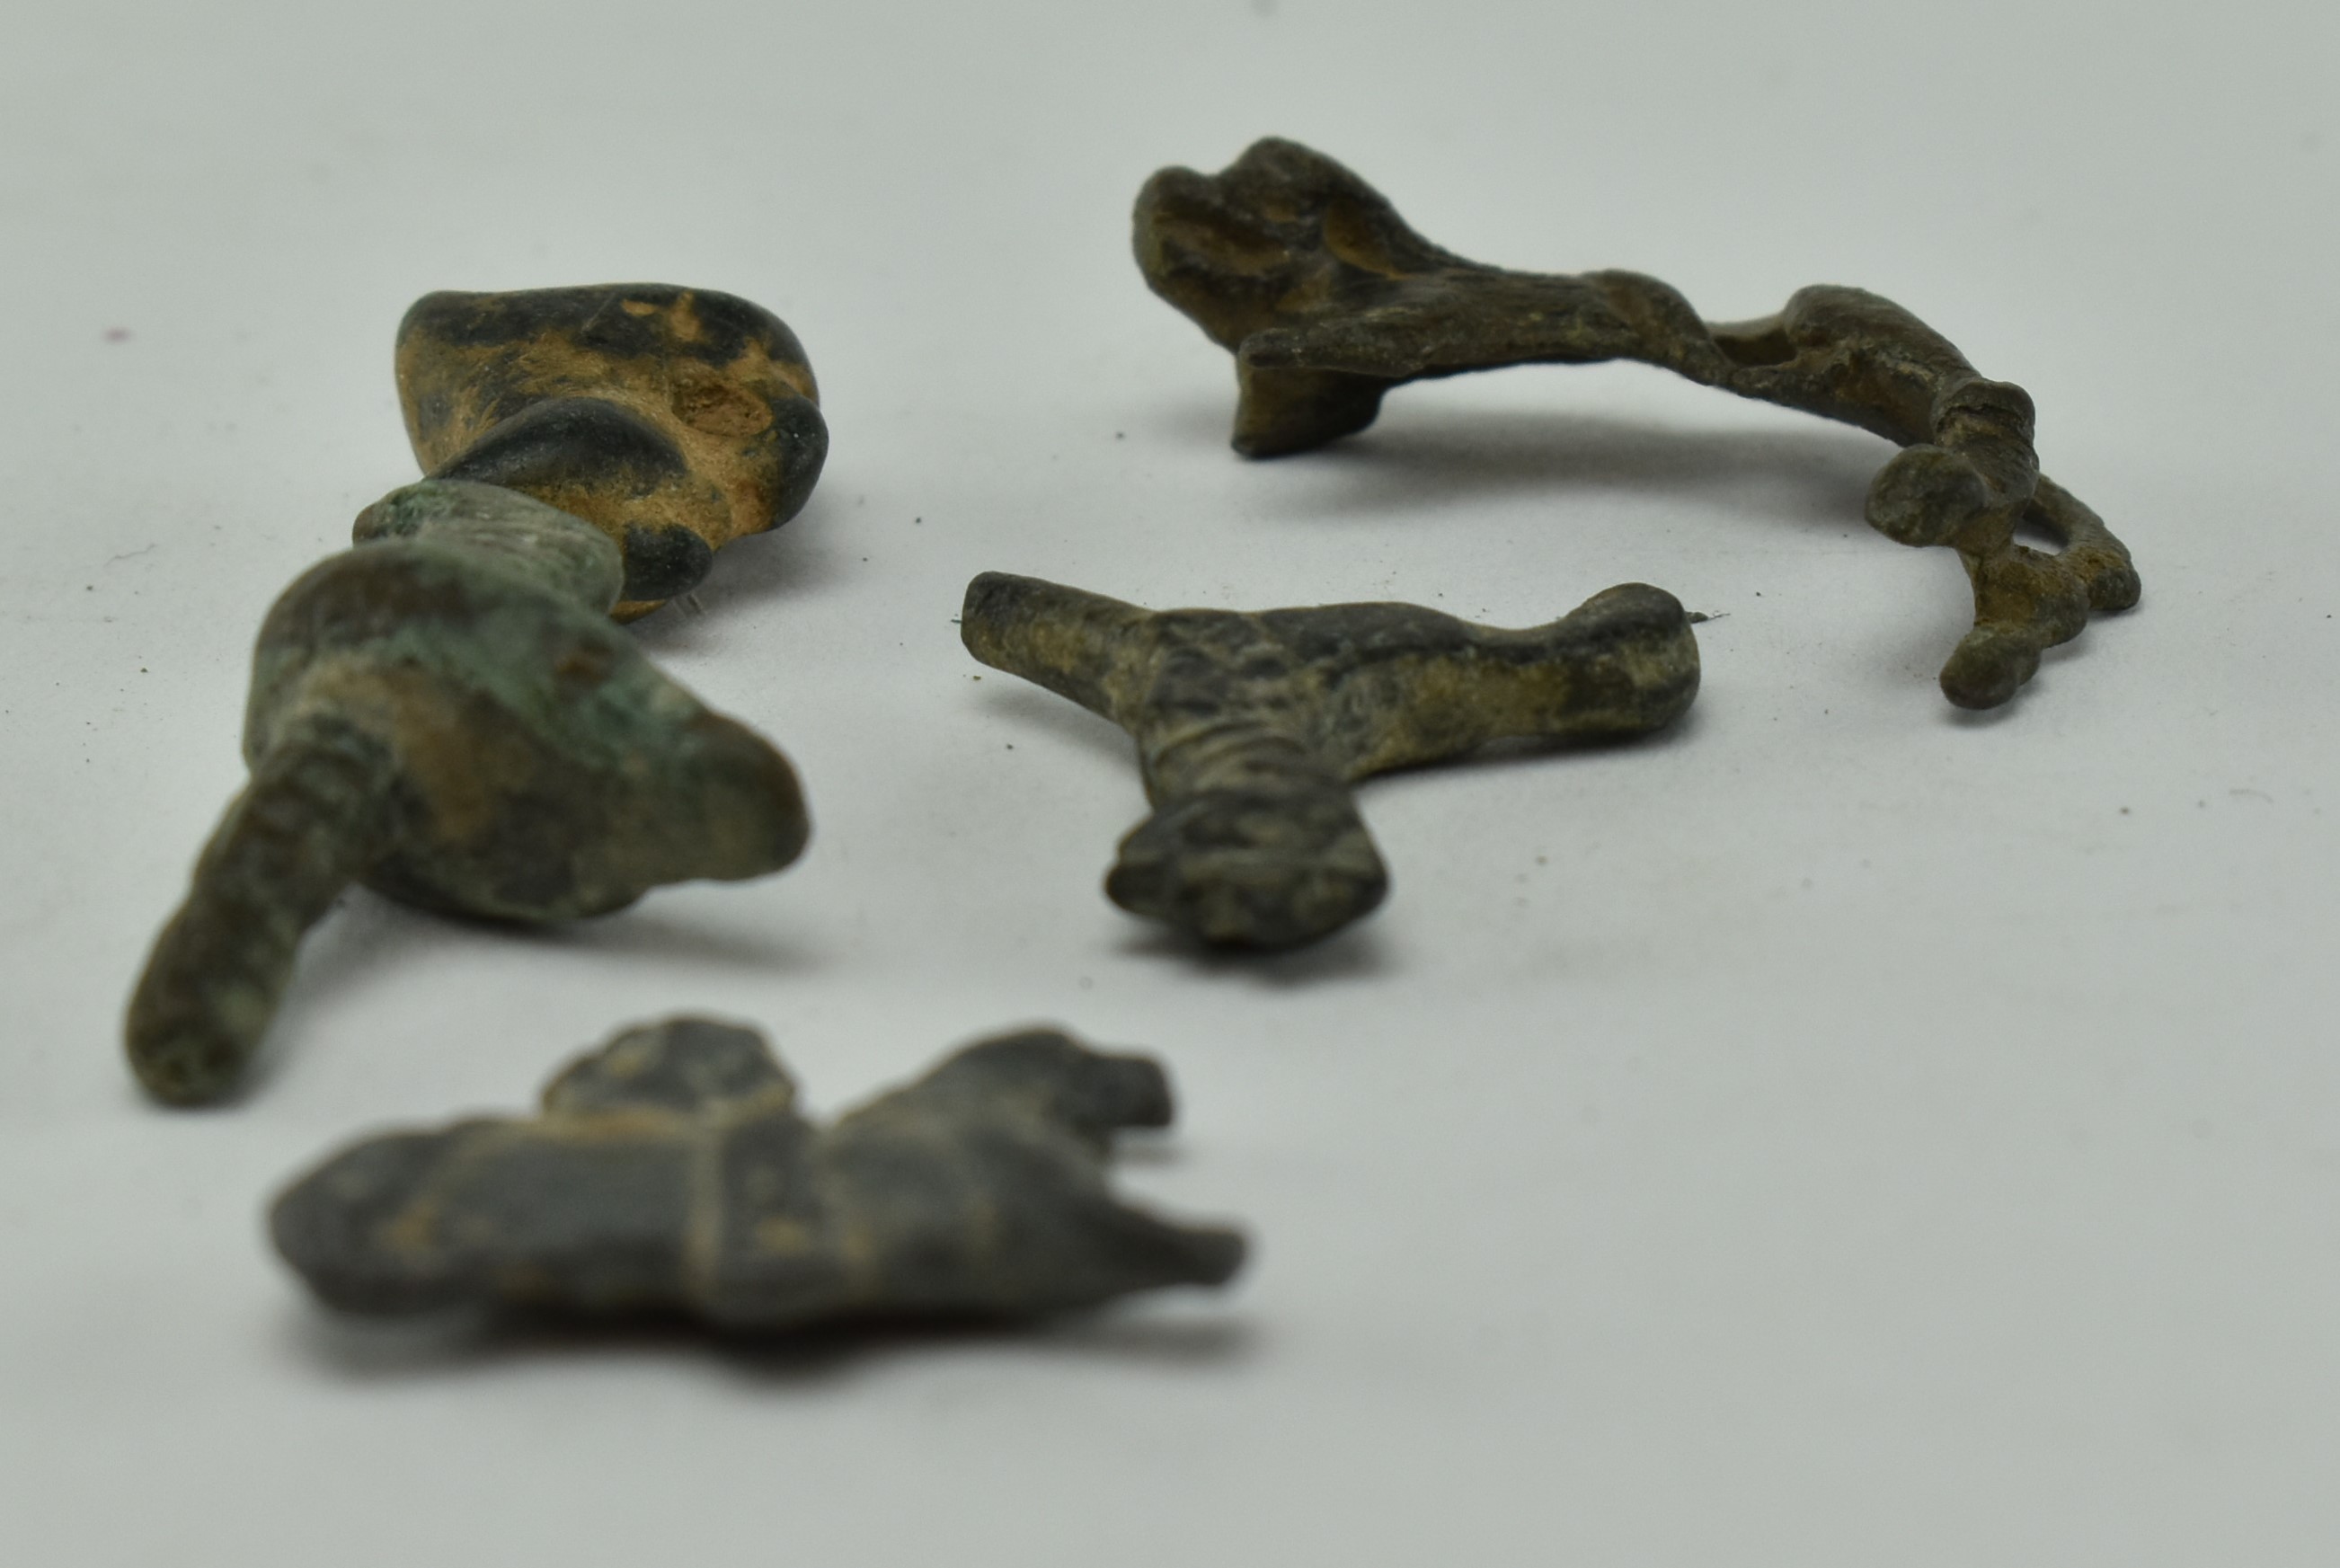 FIVE PIECES OF ANCIENT ROMAN BRONZE ANIMAL BROOCHES - Image 2 of 2